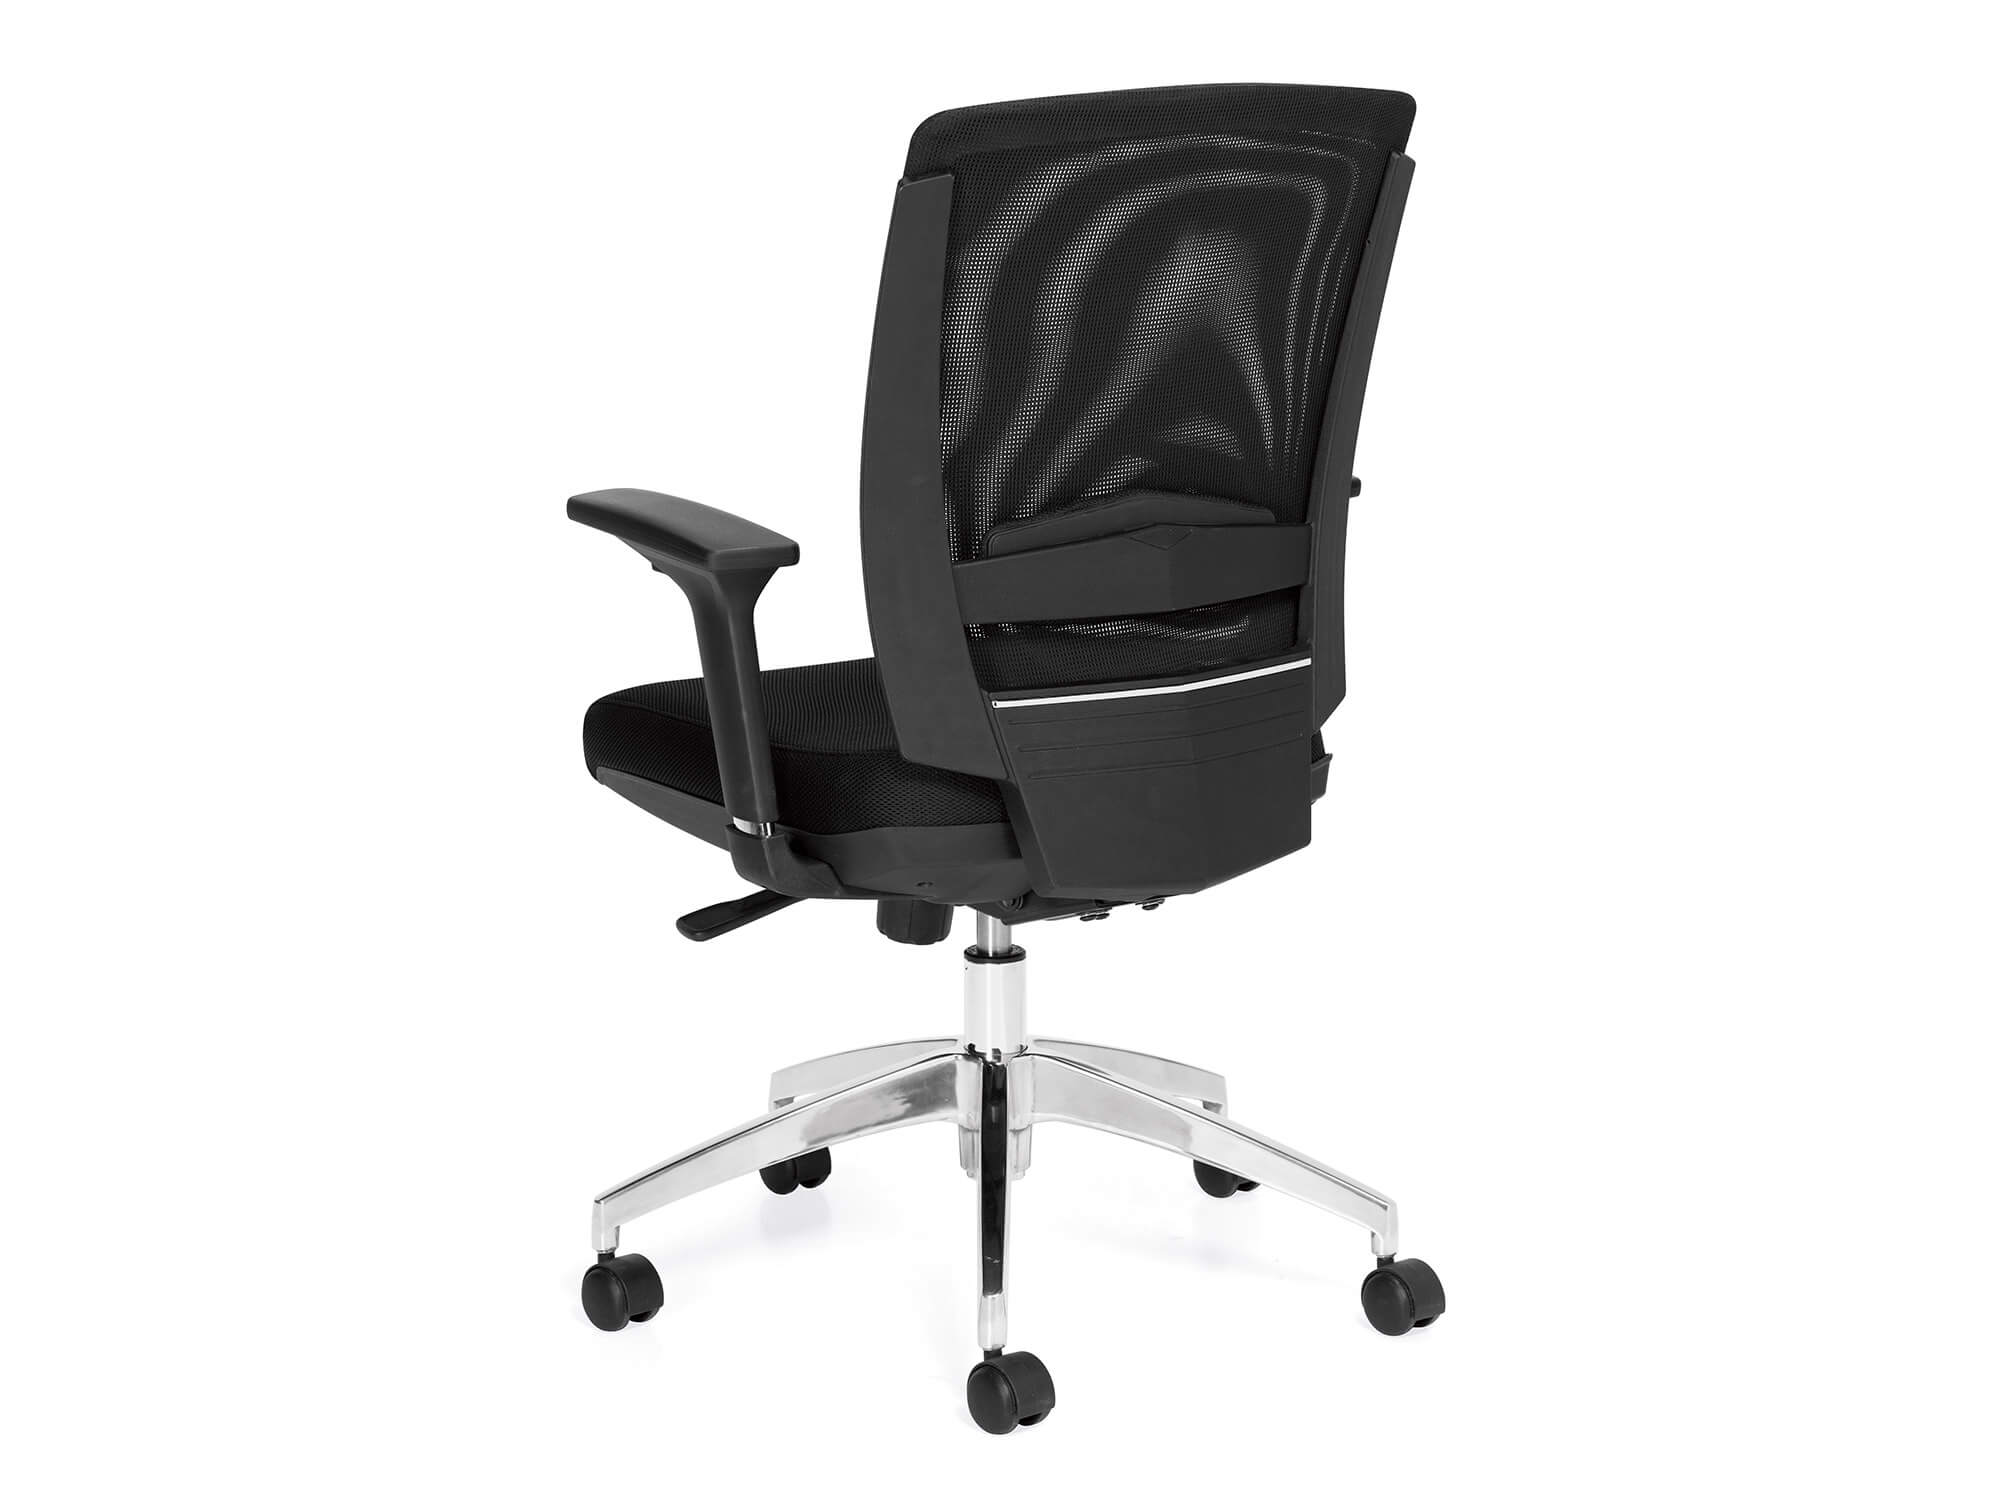 Workstation chair back